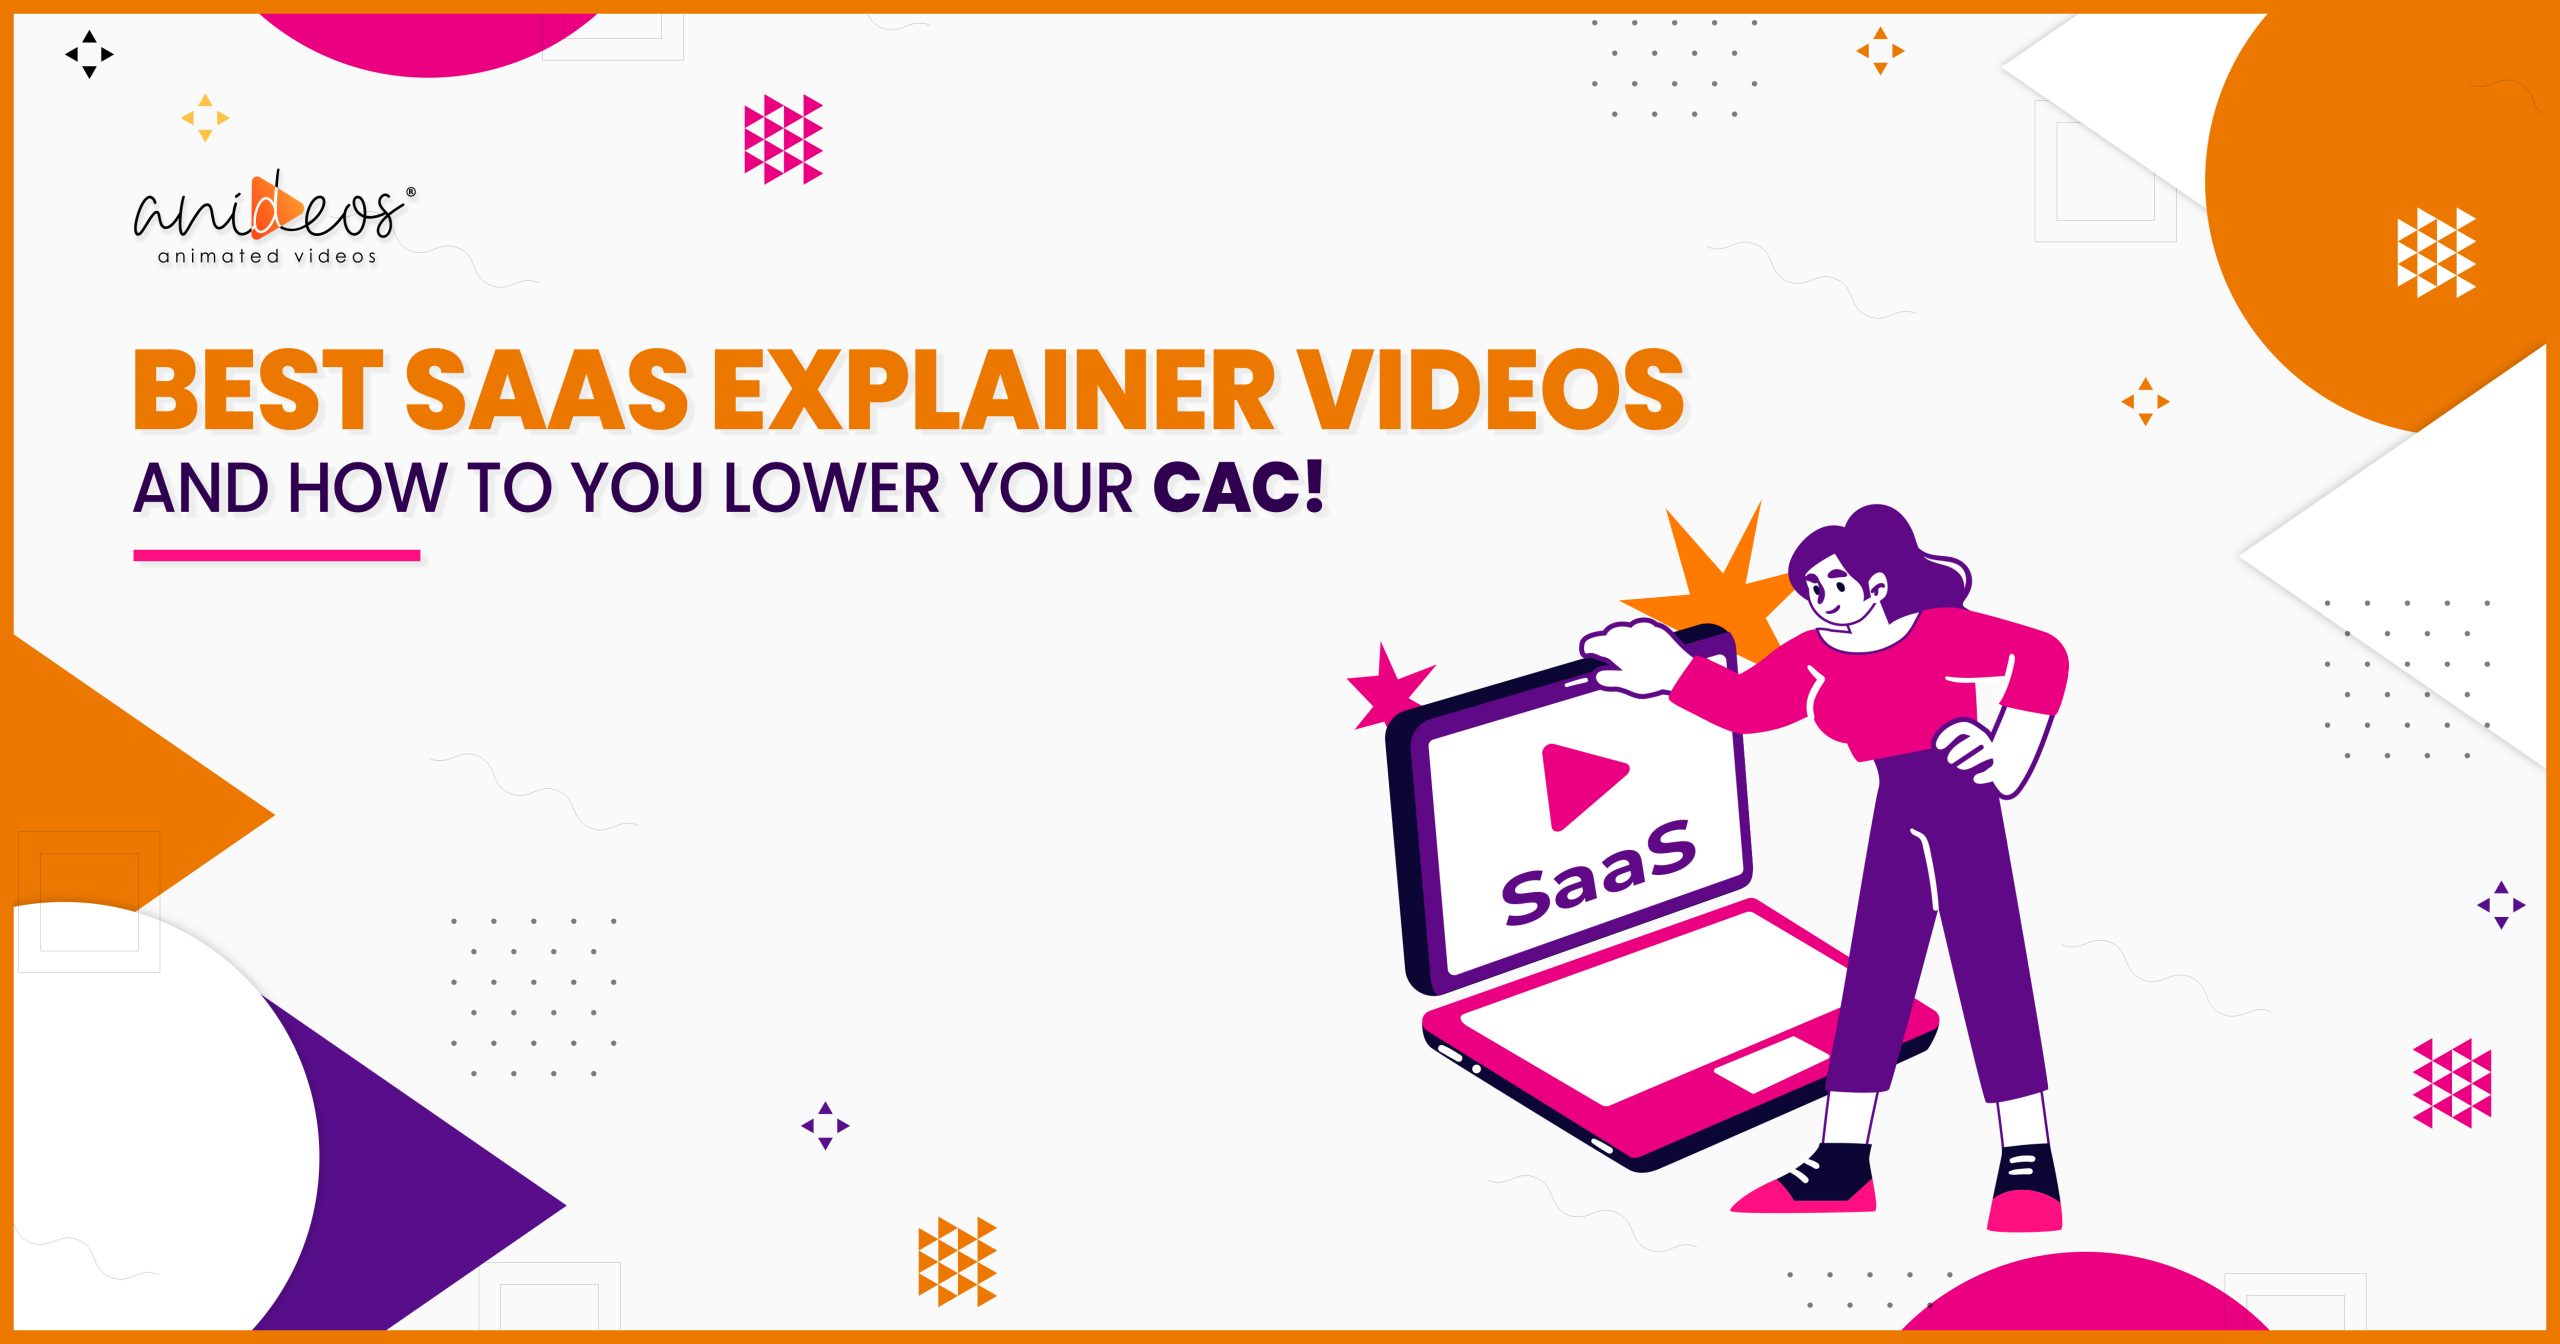 Best SaaS Explainer Videos and How to Lower Your CAC!